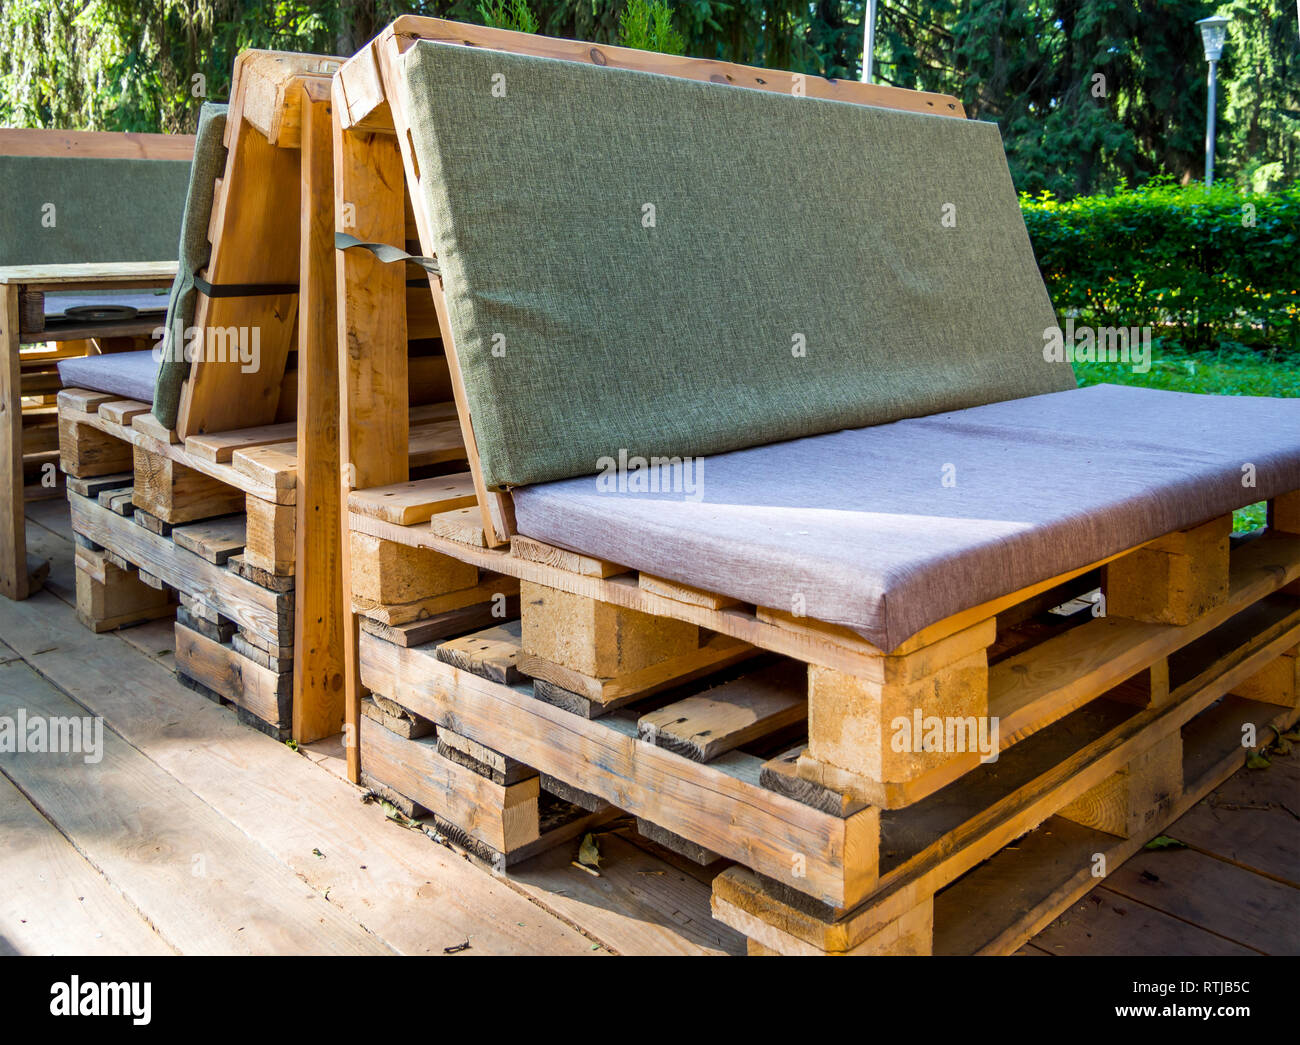 Furniture made from old wooden cargo pallets Stock Photo - Alamy